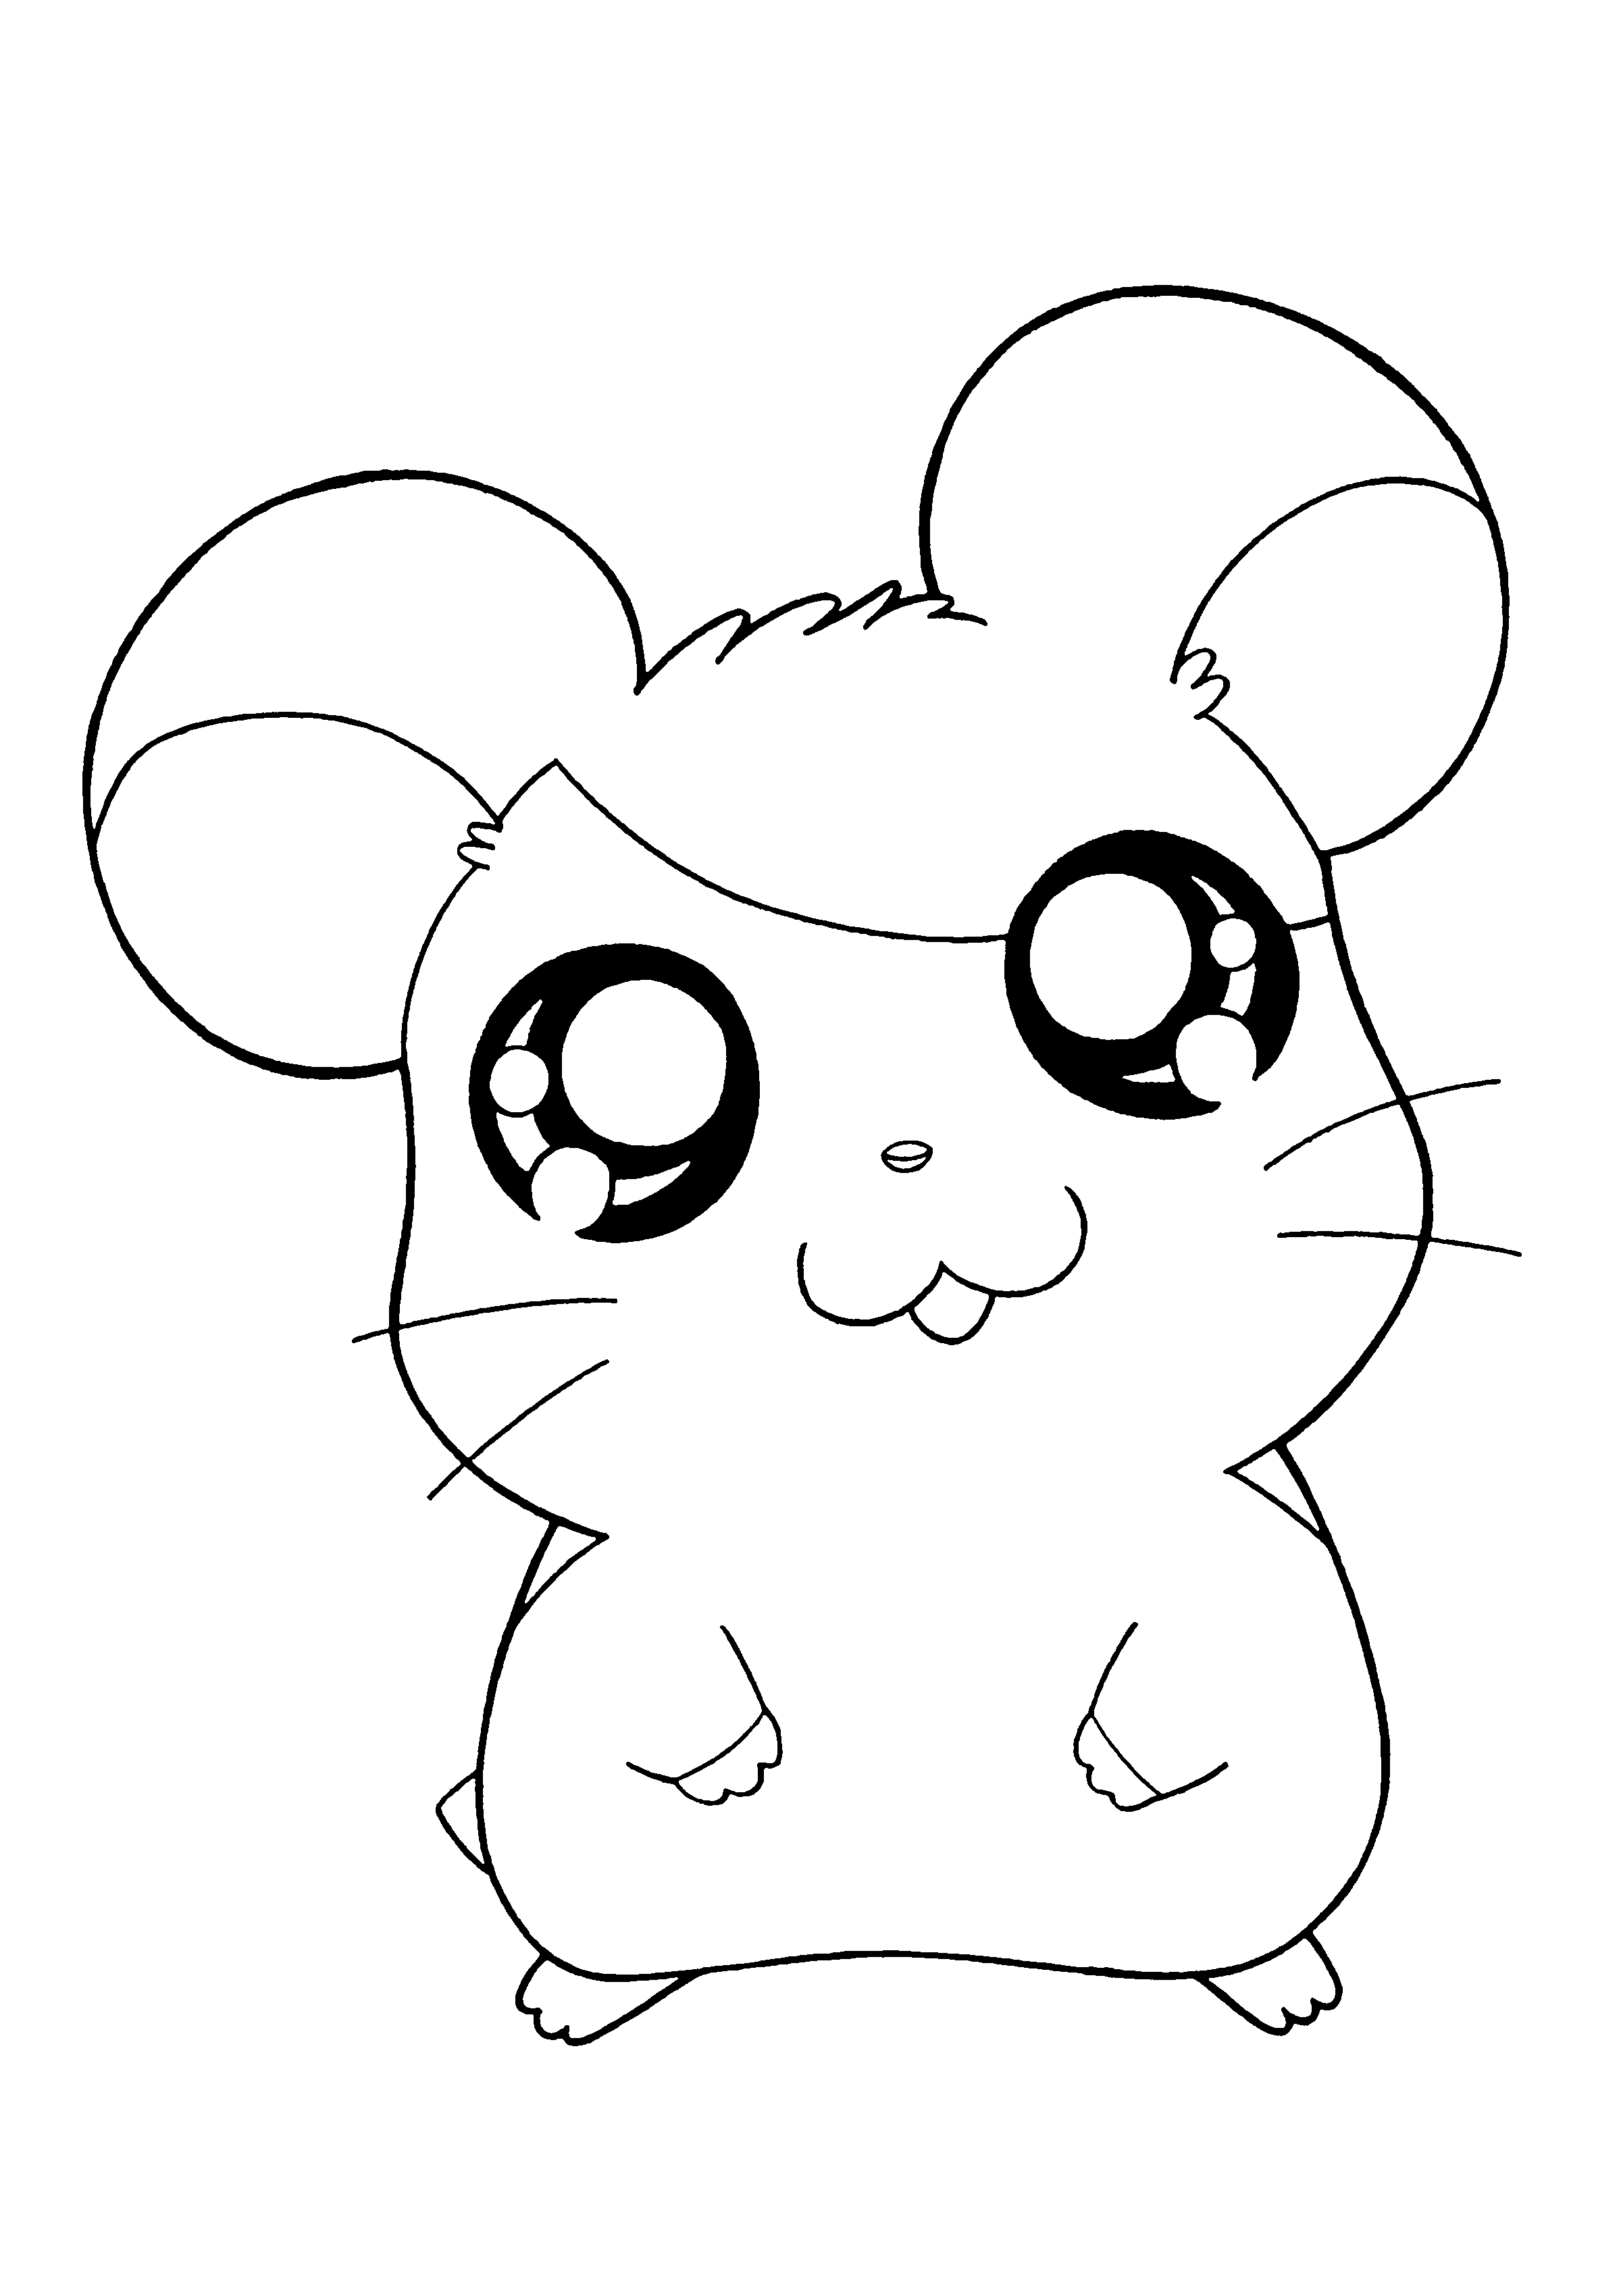 Hamtaro Coloring Pictures - High Quality Coloring Pages